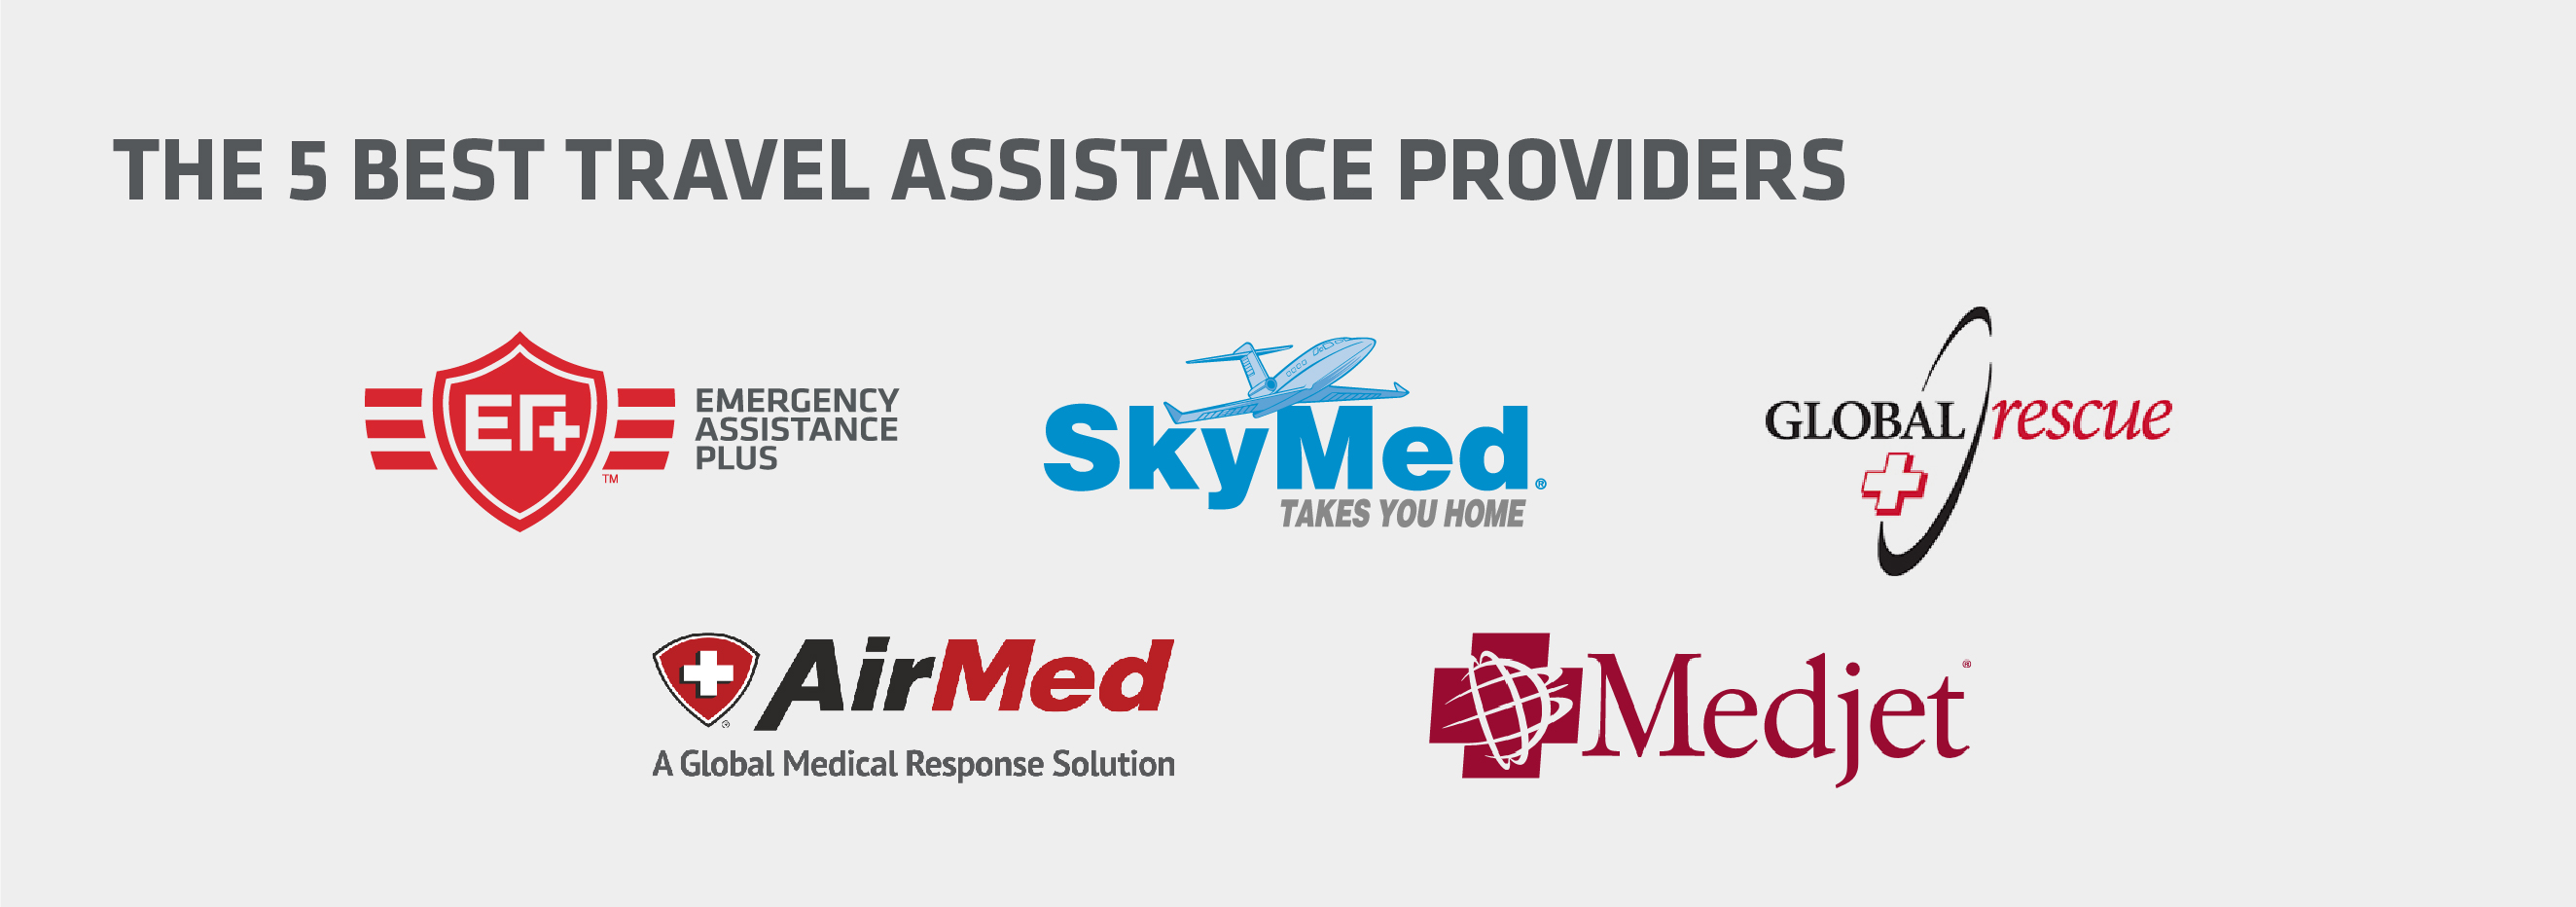 travel medical assistance company